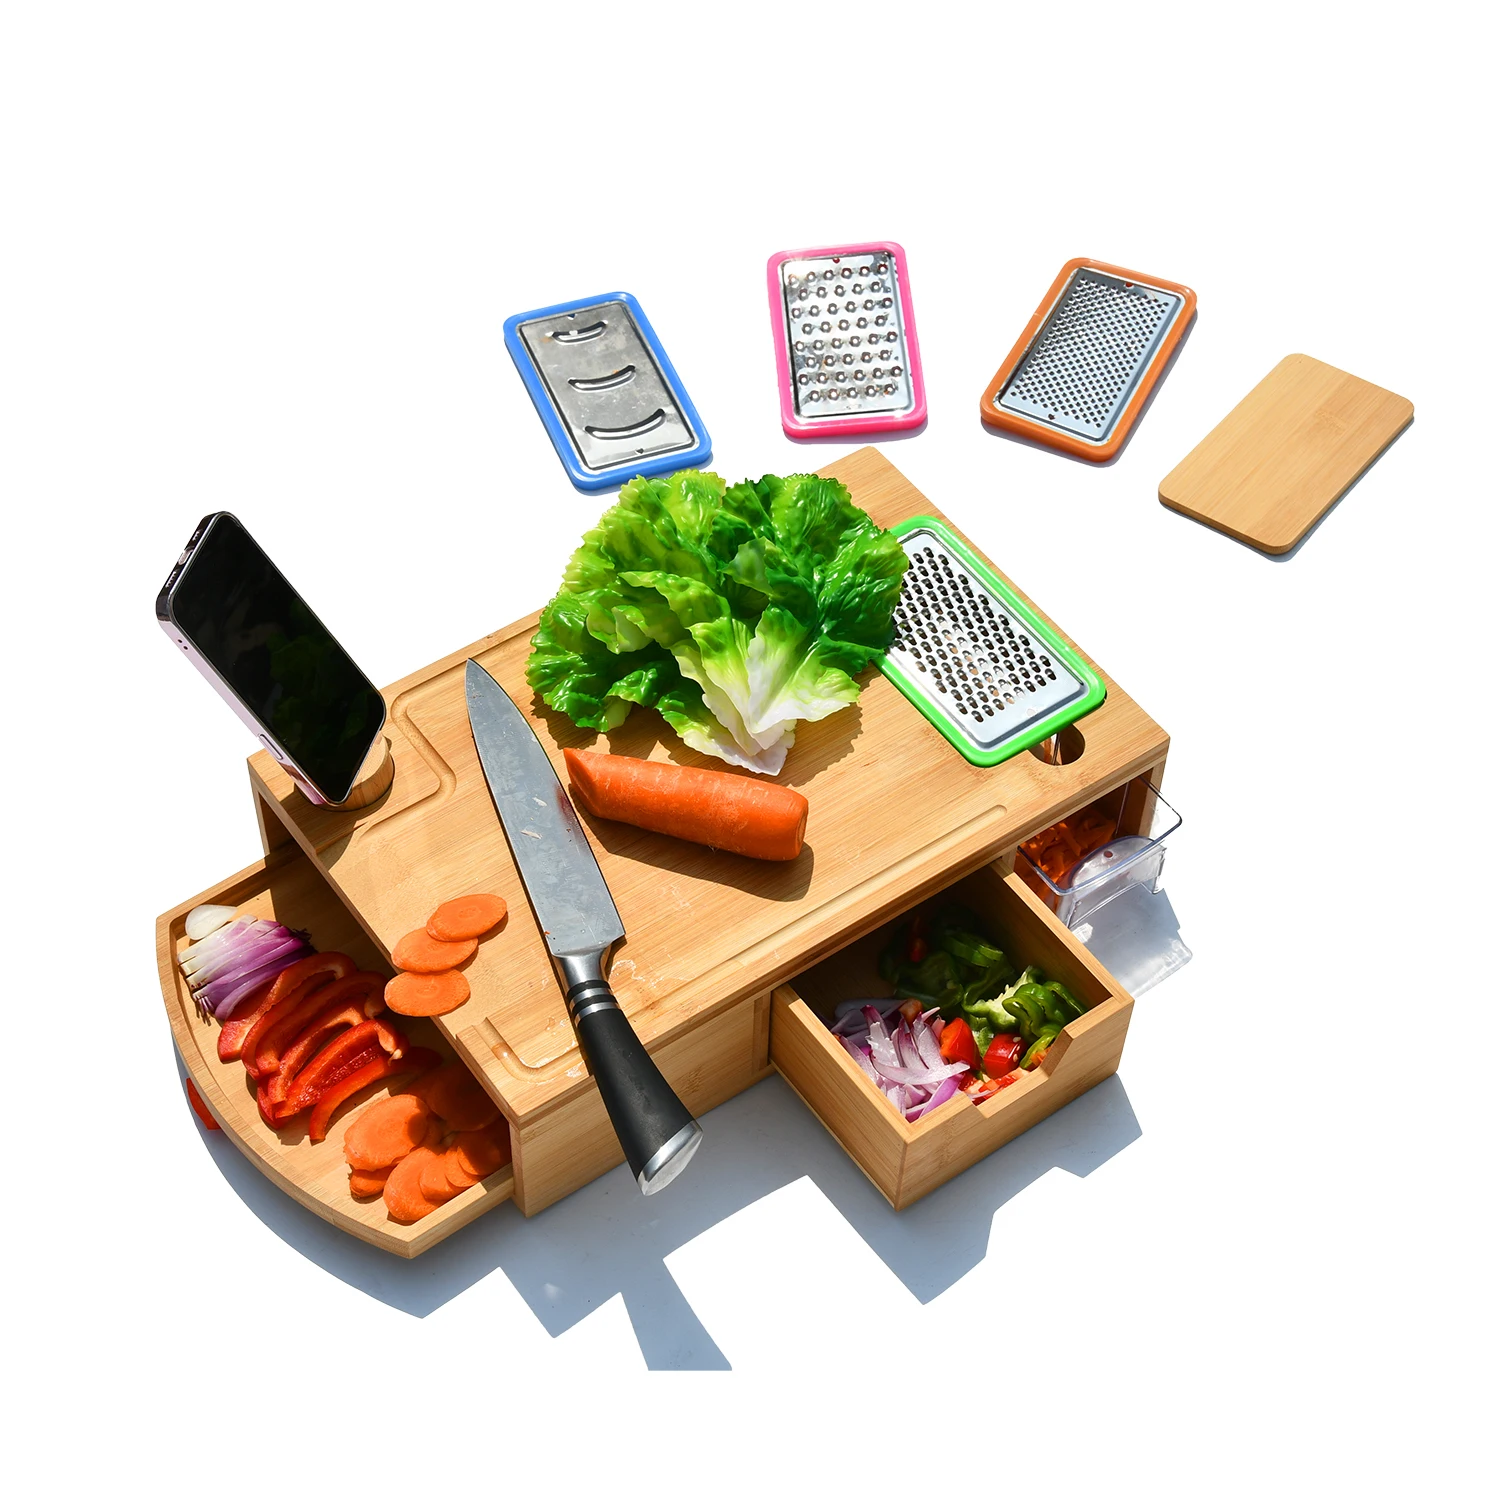 Recycled Premium Kitchen Bamboo Chopping Block Cutting Board With Containers Phone Holder Vegetable Grater